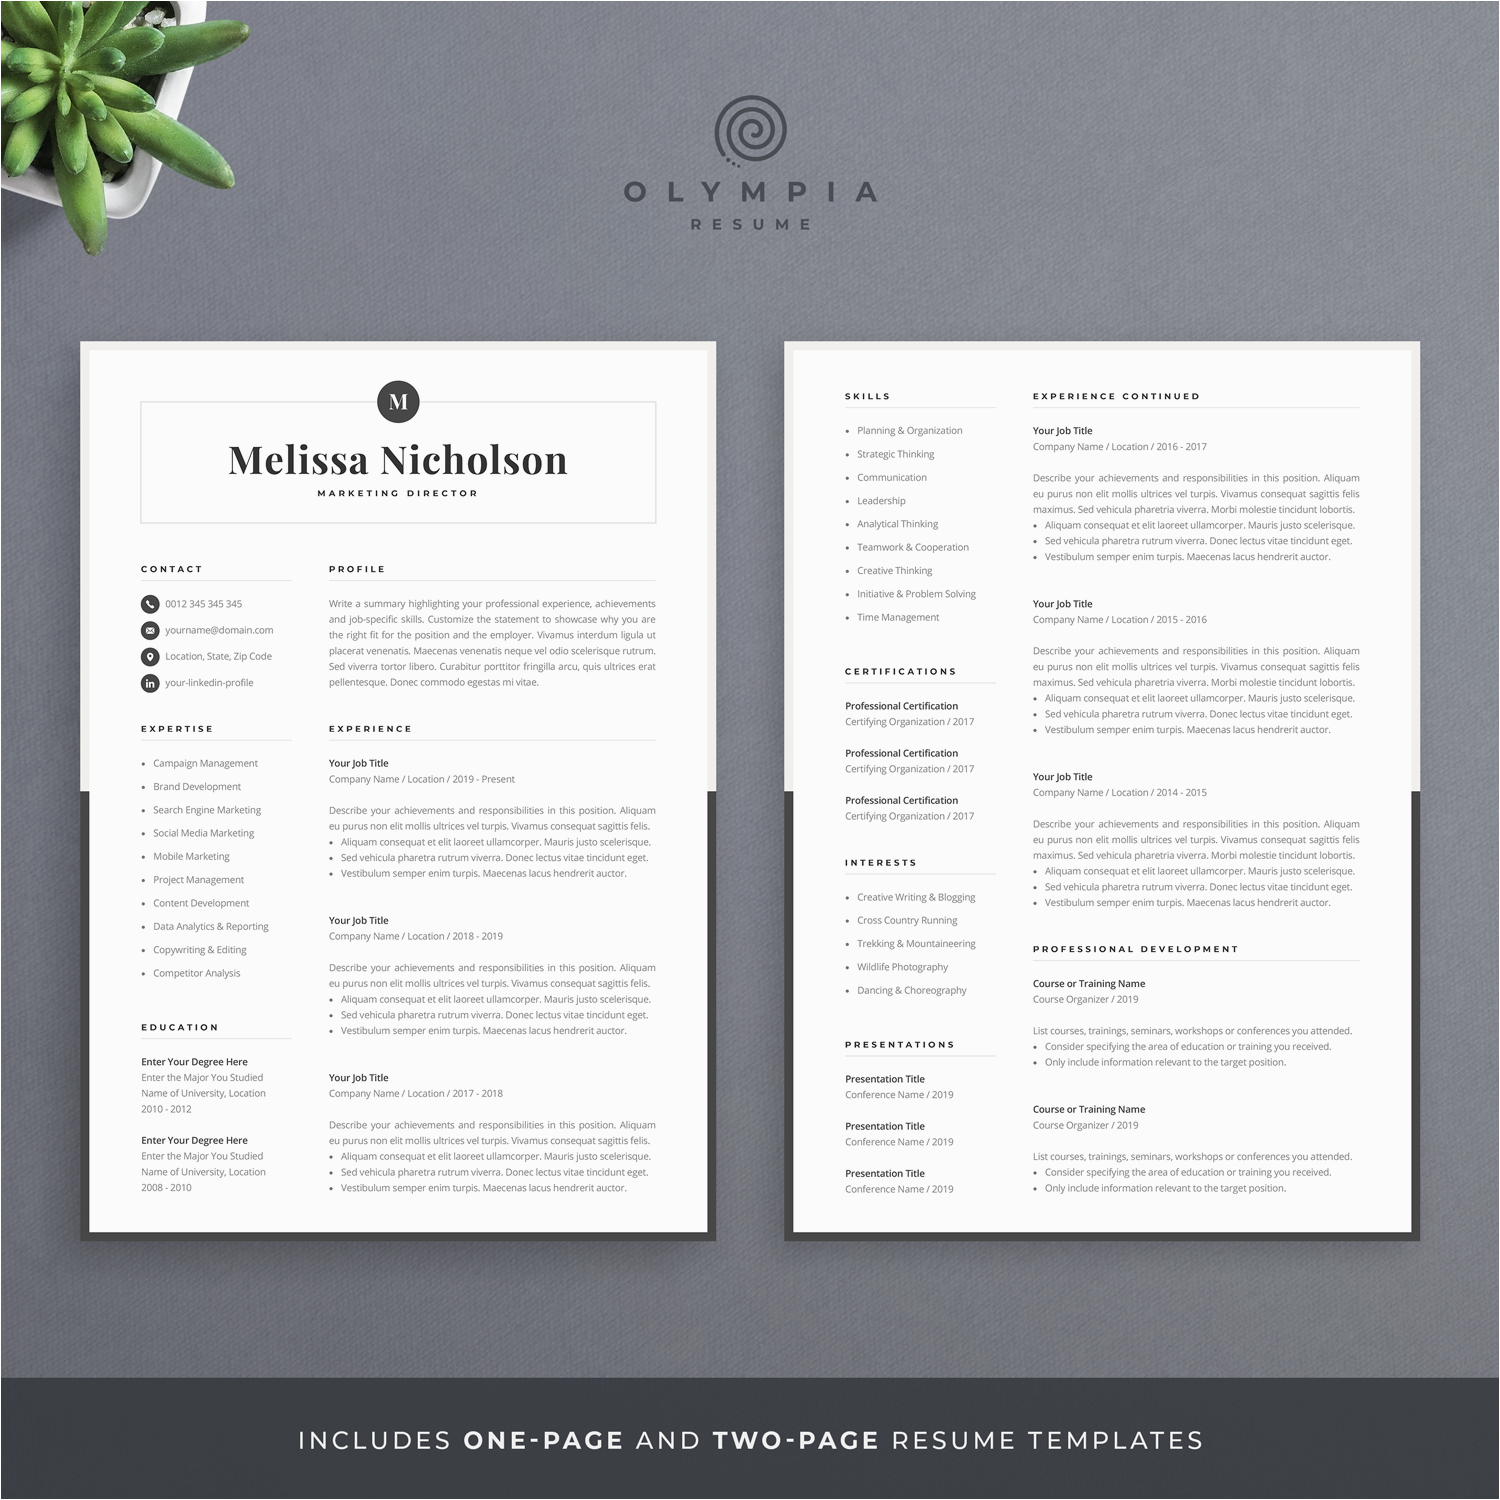 Matching Resume and Cover Letter Templates Resume Template with Matching Cover Letter and References